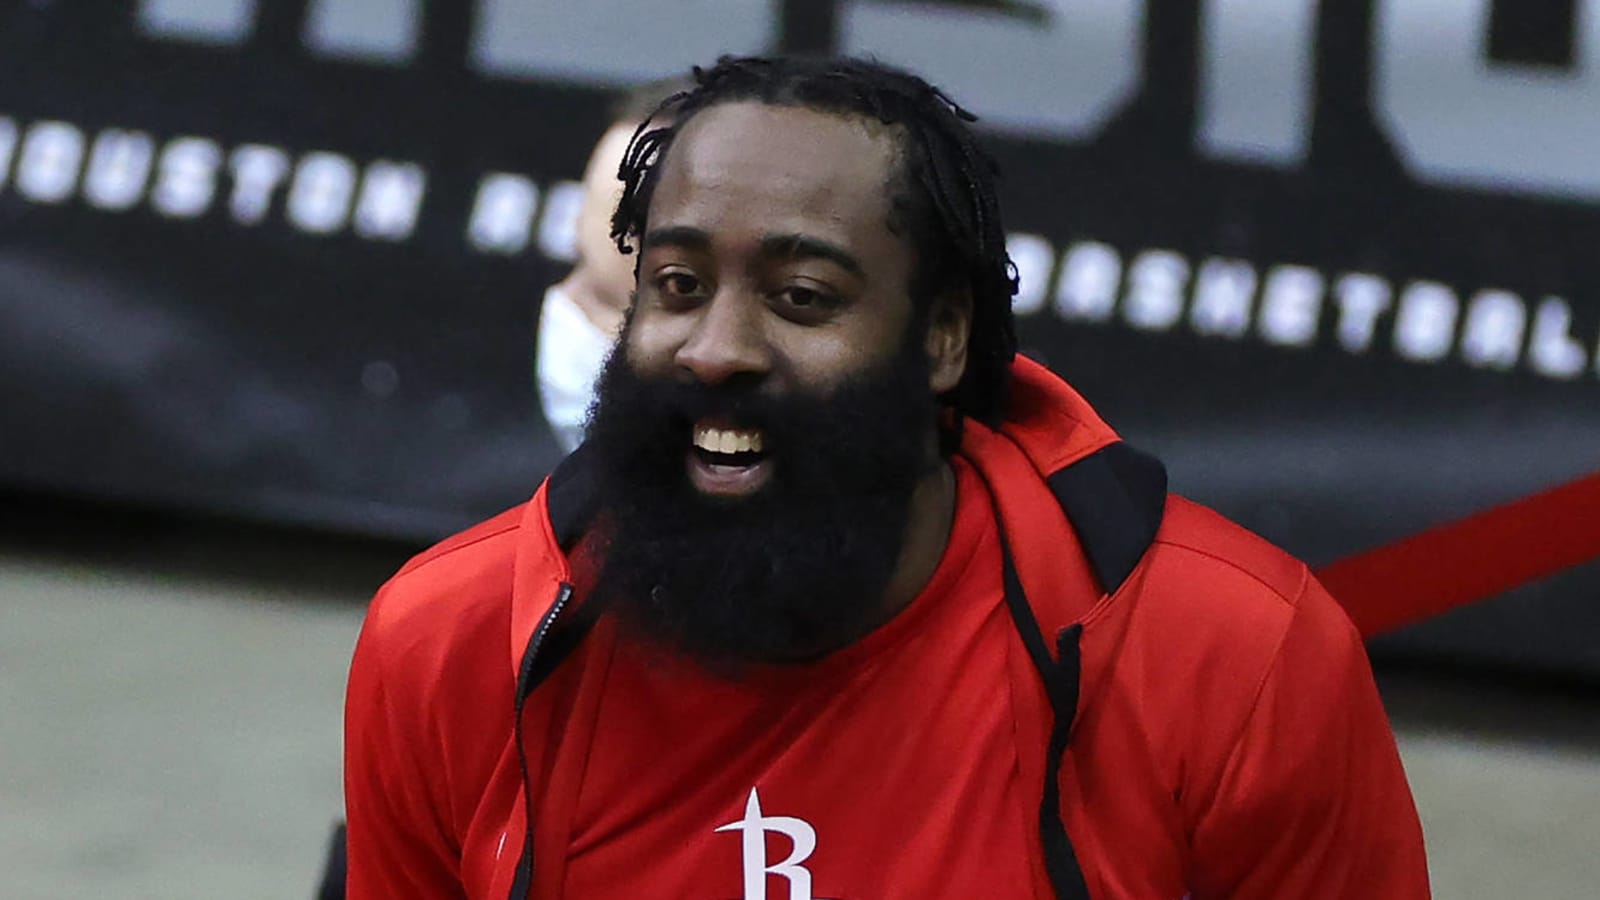 NBA fines 76ers' Daryl Morey for tweet about James Harden